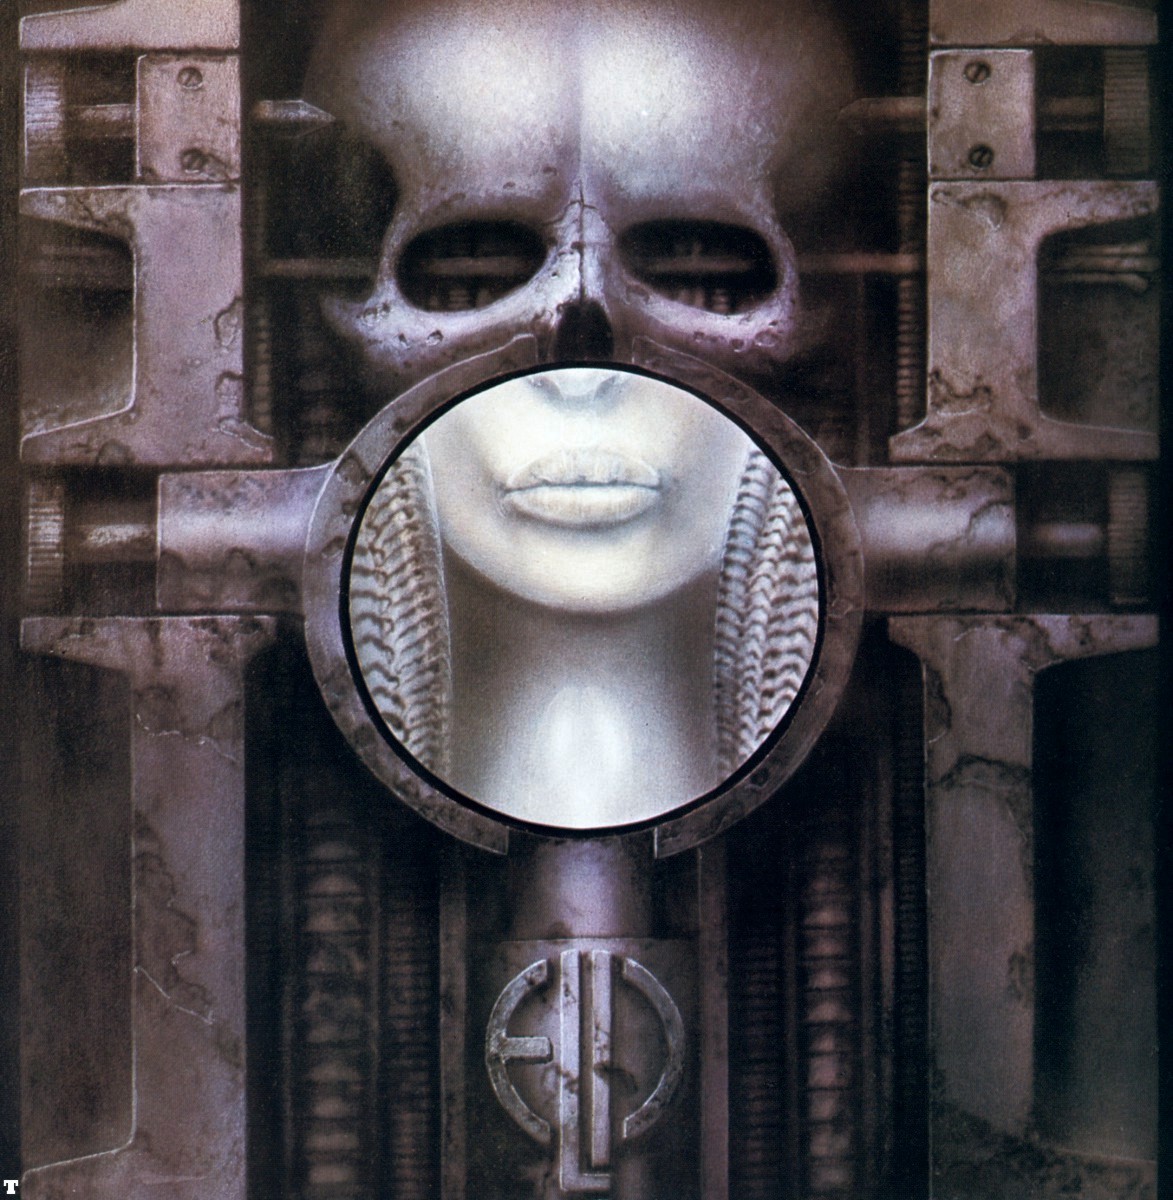 The Art of Giger – Part IV